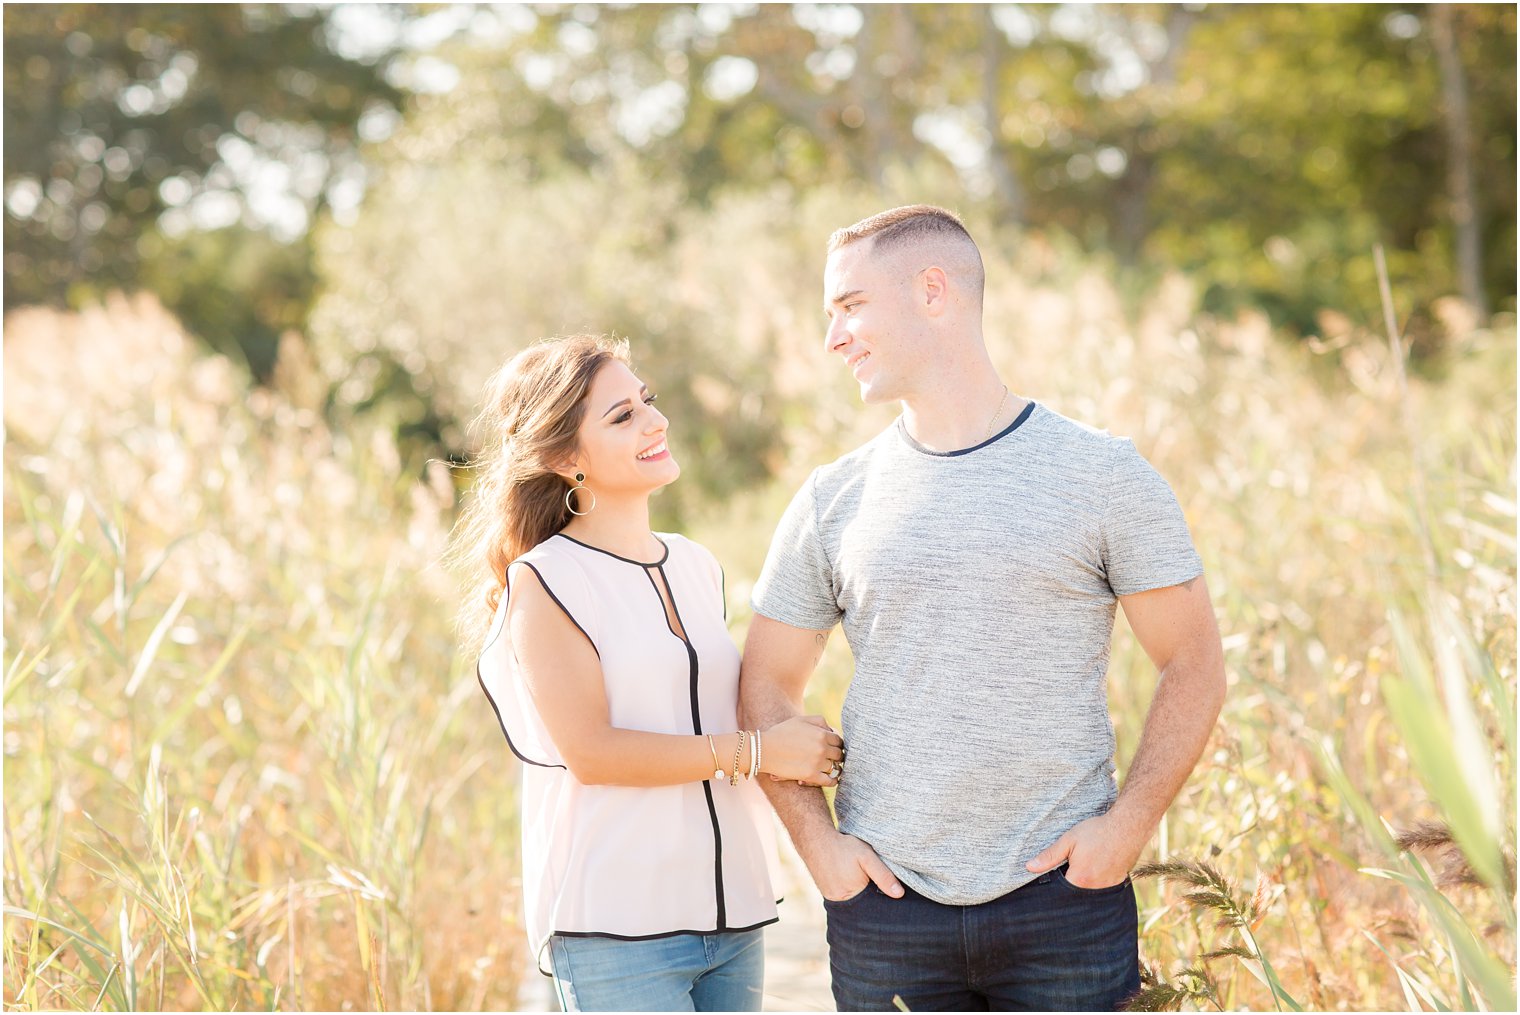 Cape May Point State Park Engagement Photos | Photos by Idalia Photography